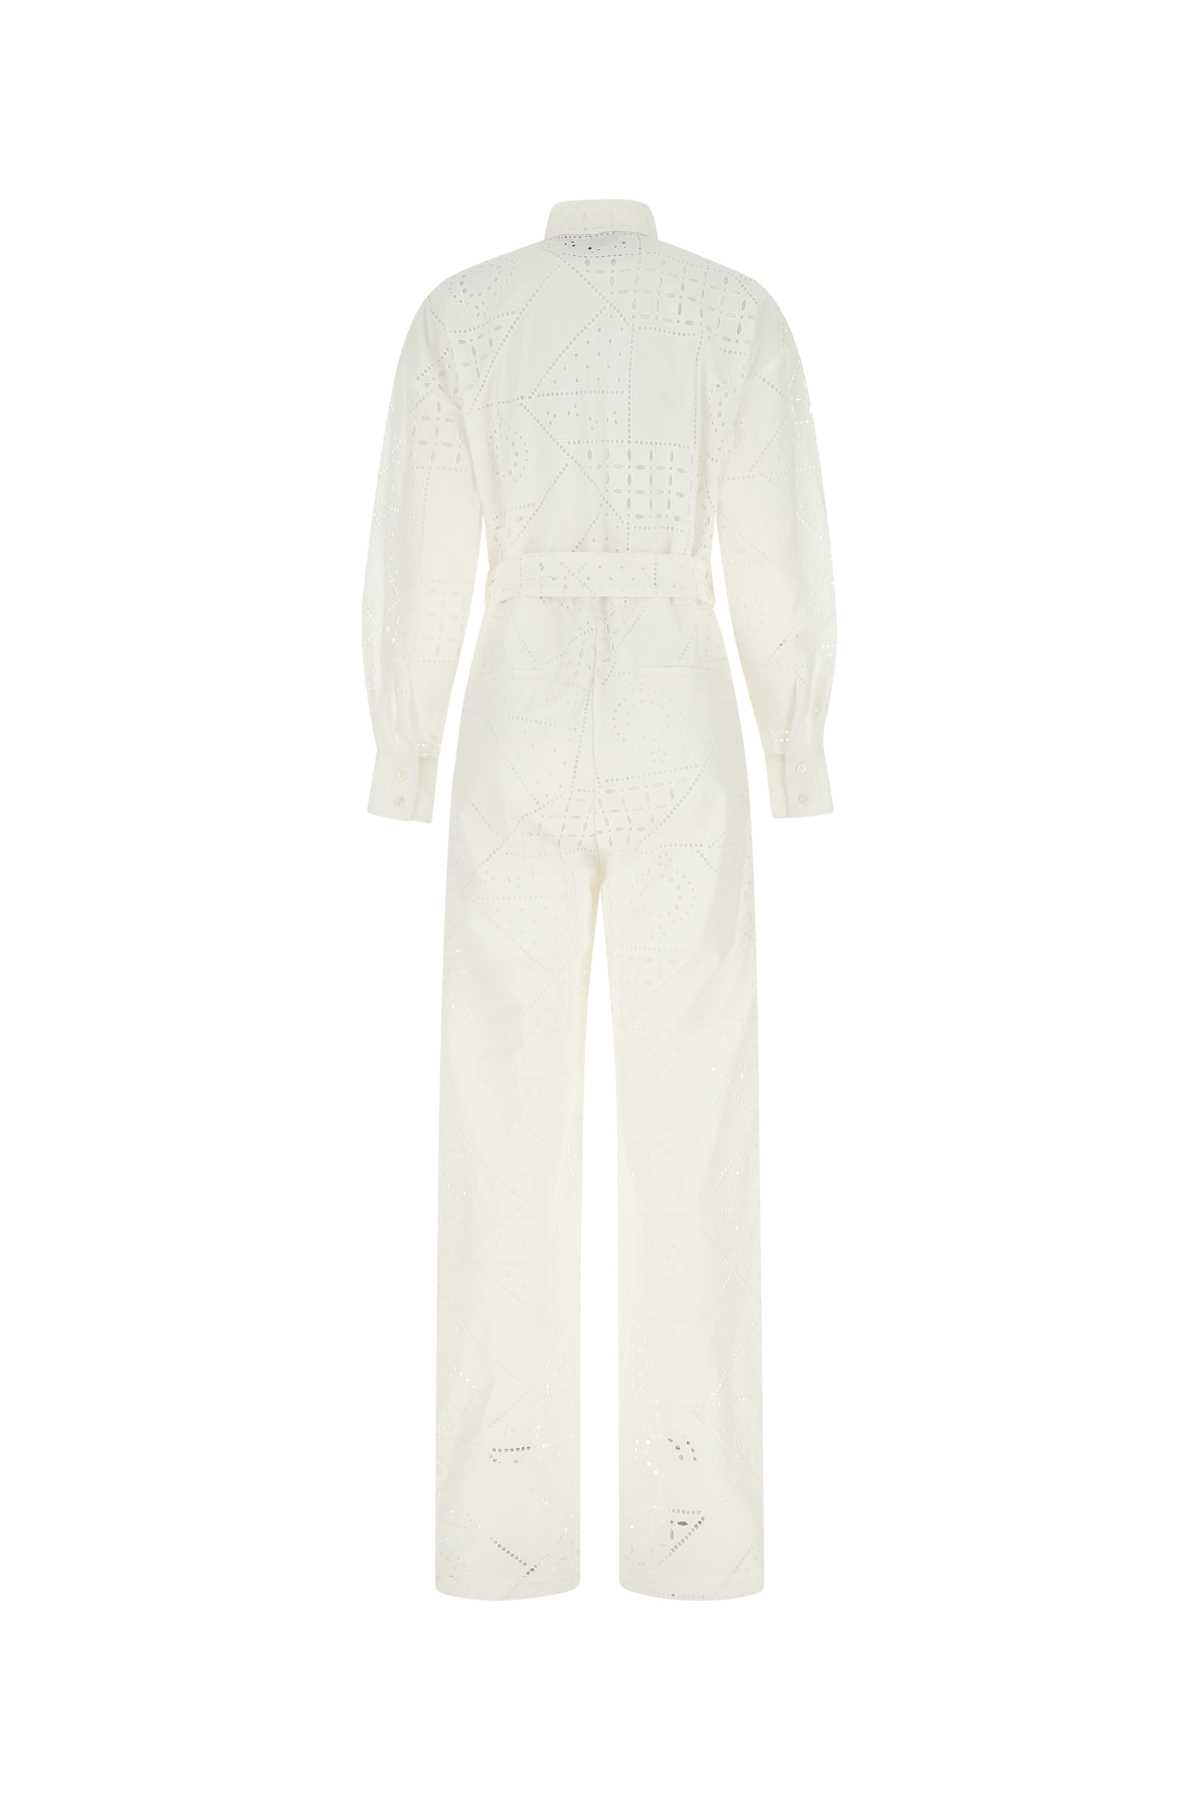 Msgm White Cotton Blend Jumpsuit In 02